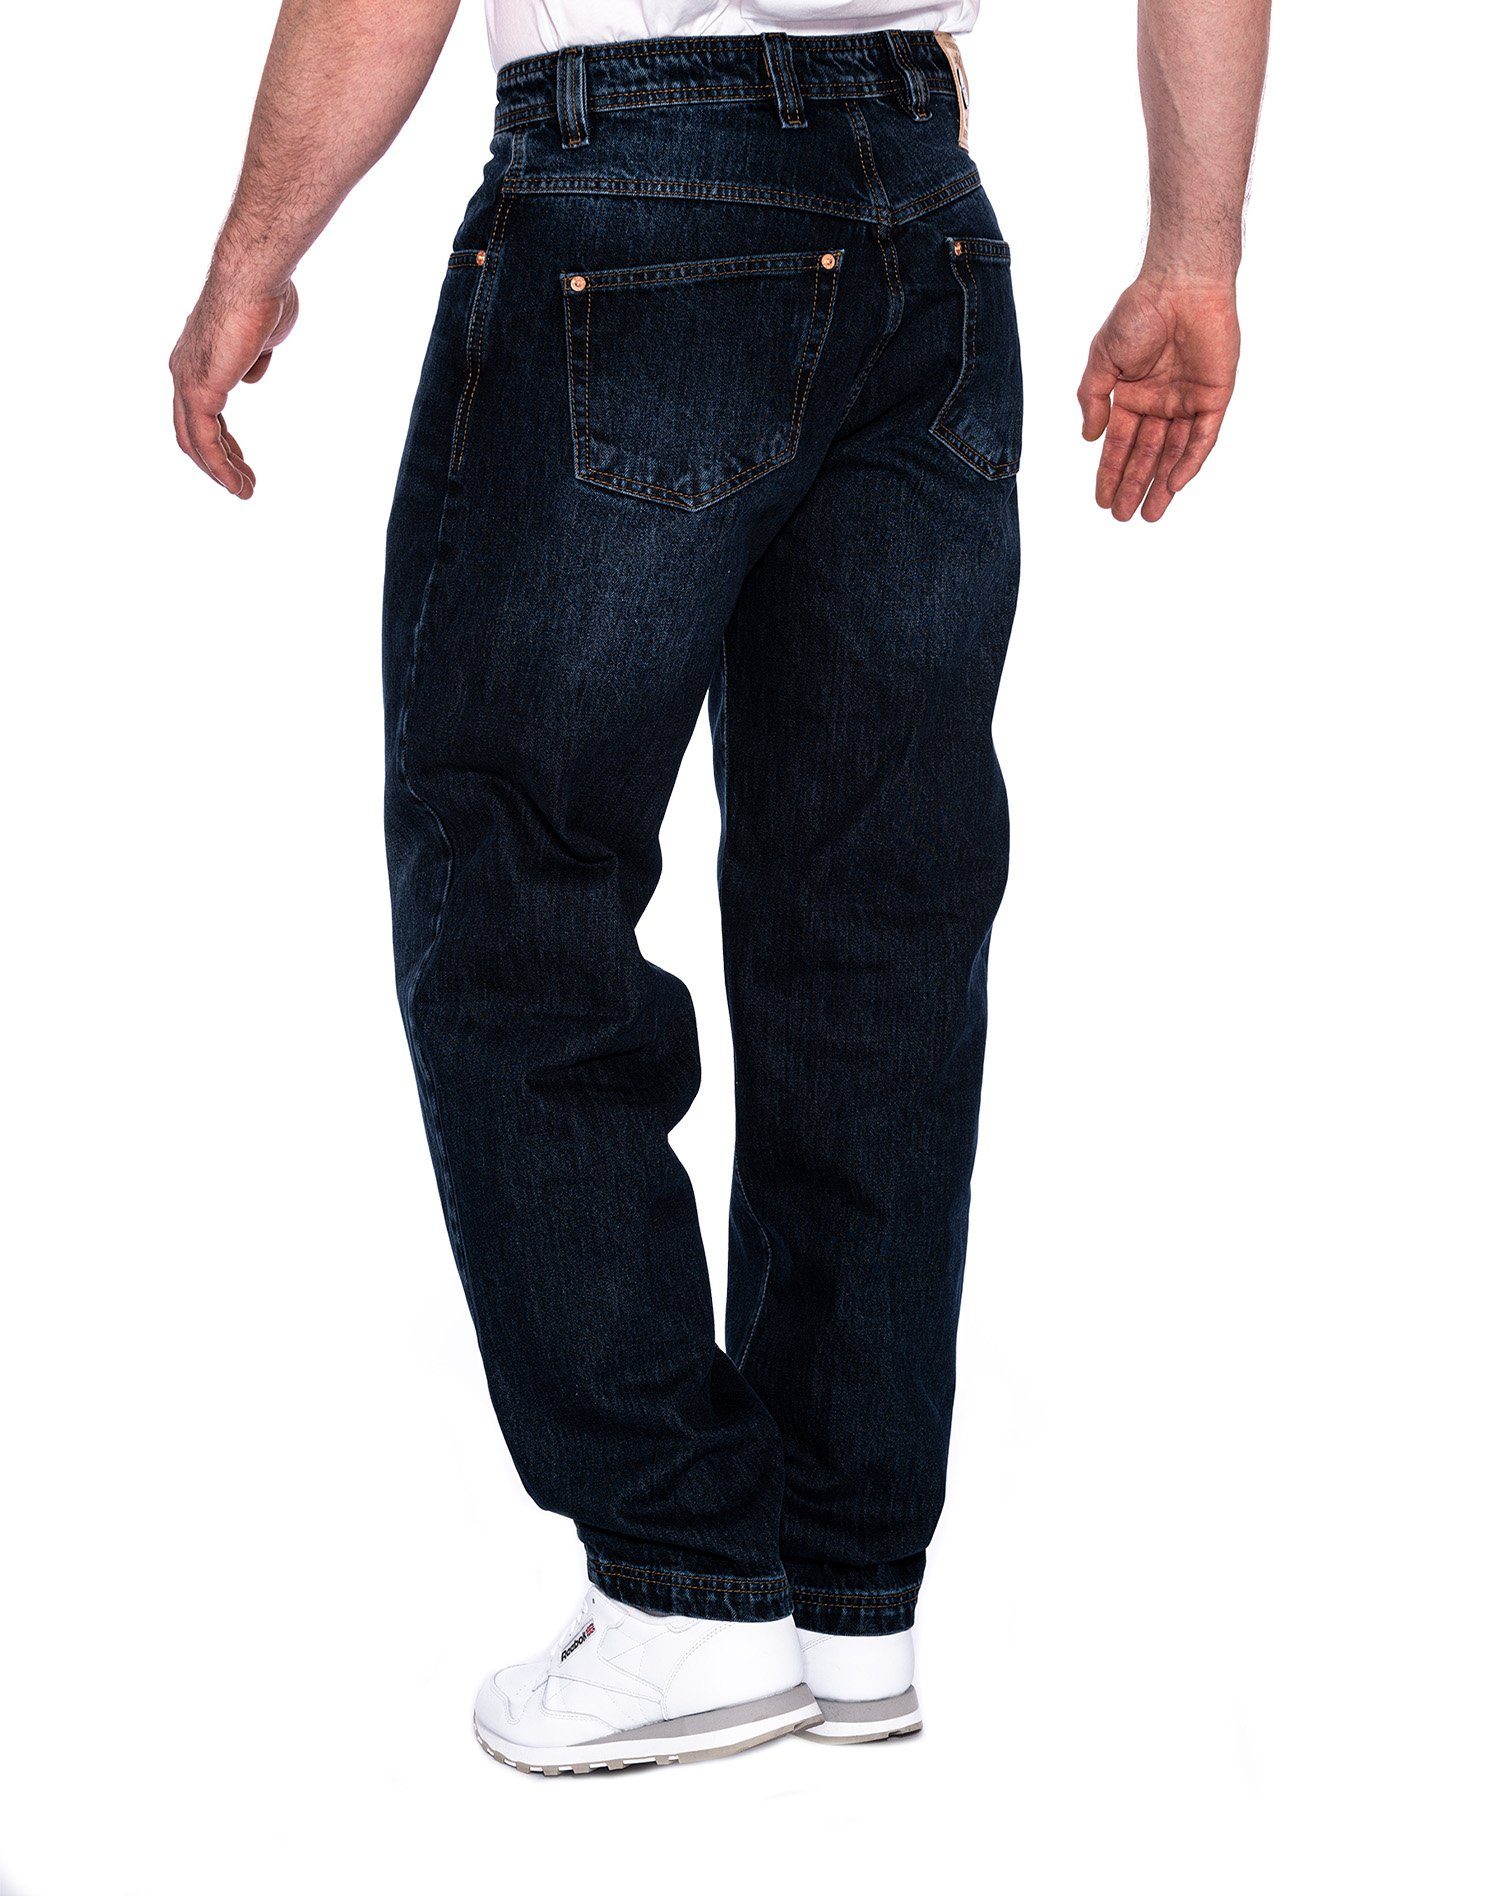 PICALDI Jeans Loose Weite Hurricane Jeans Pocket 471 Fit, Jeans Zicco Five